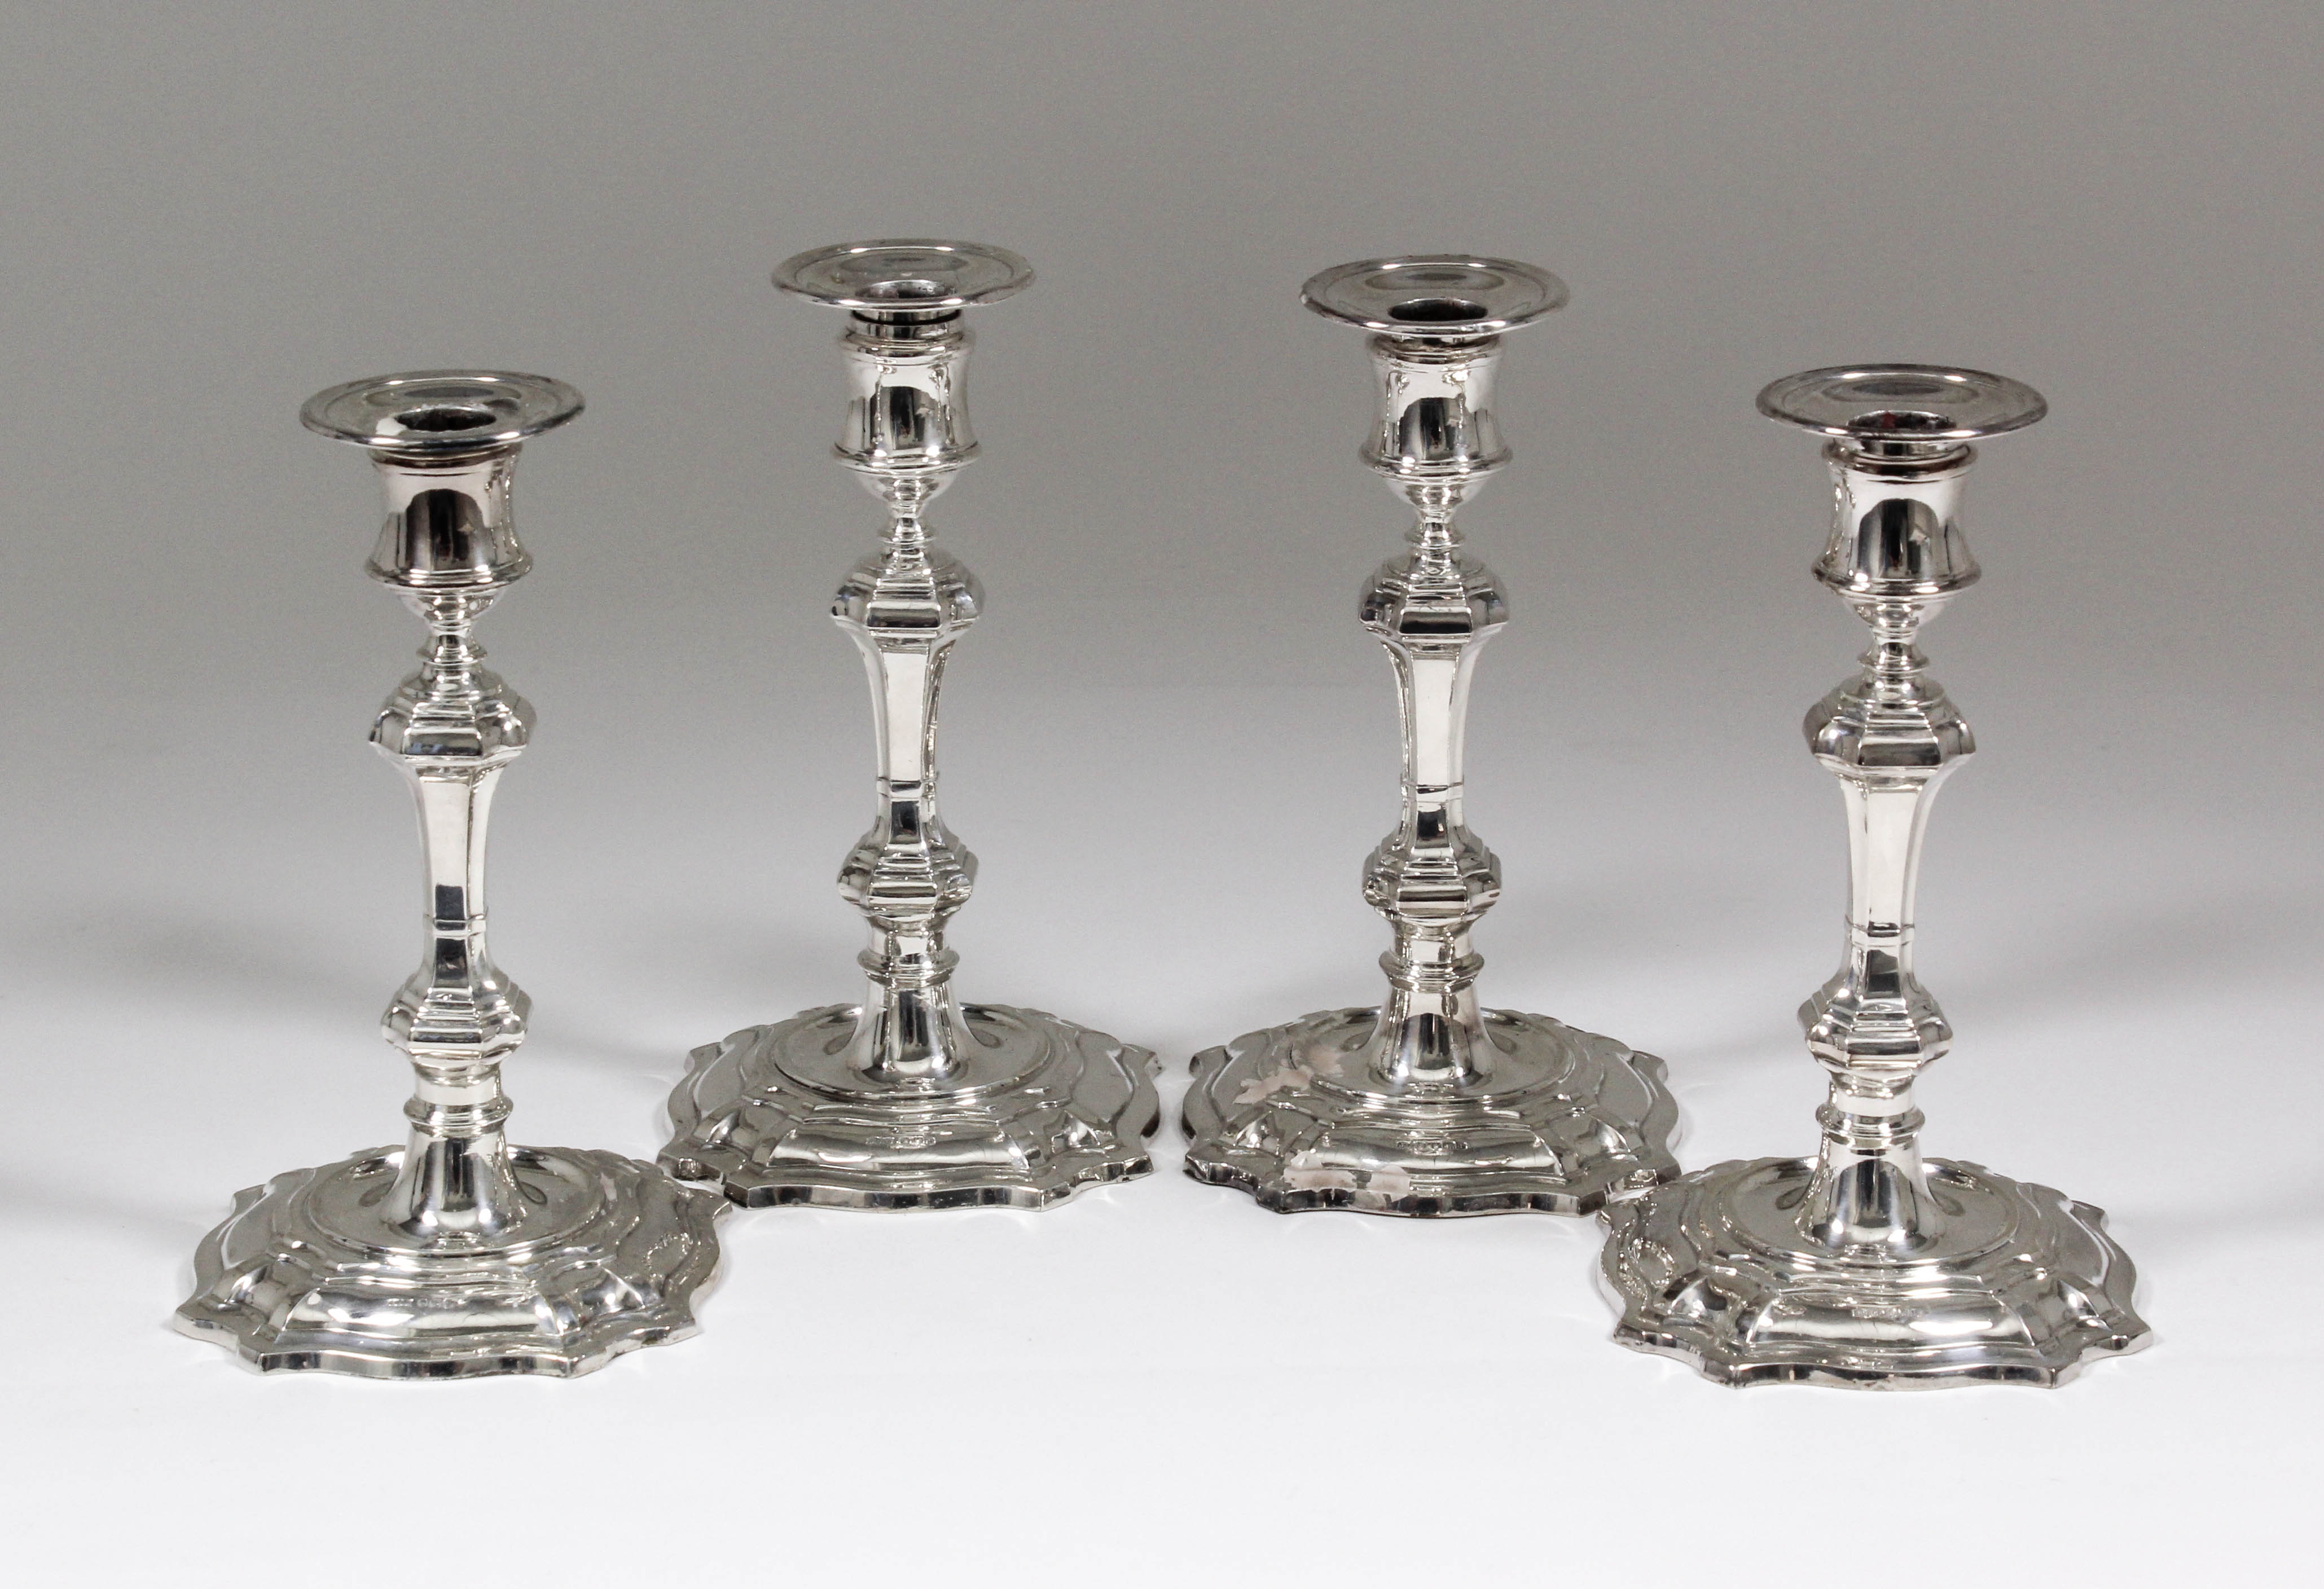 A set of four Elizabeth II silver pillar candlesticks of 18th Century design, with octagonal knopped